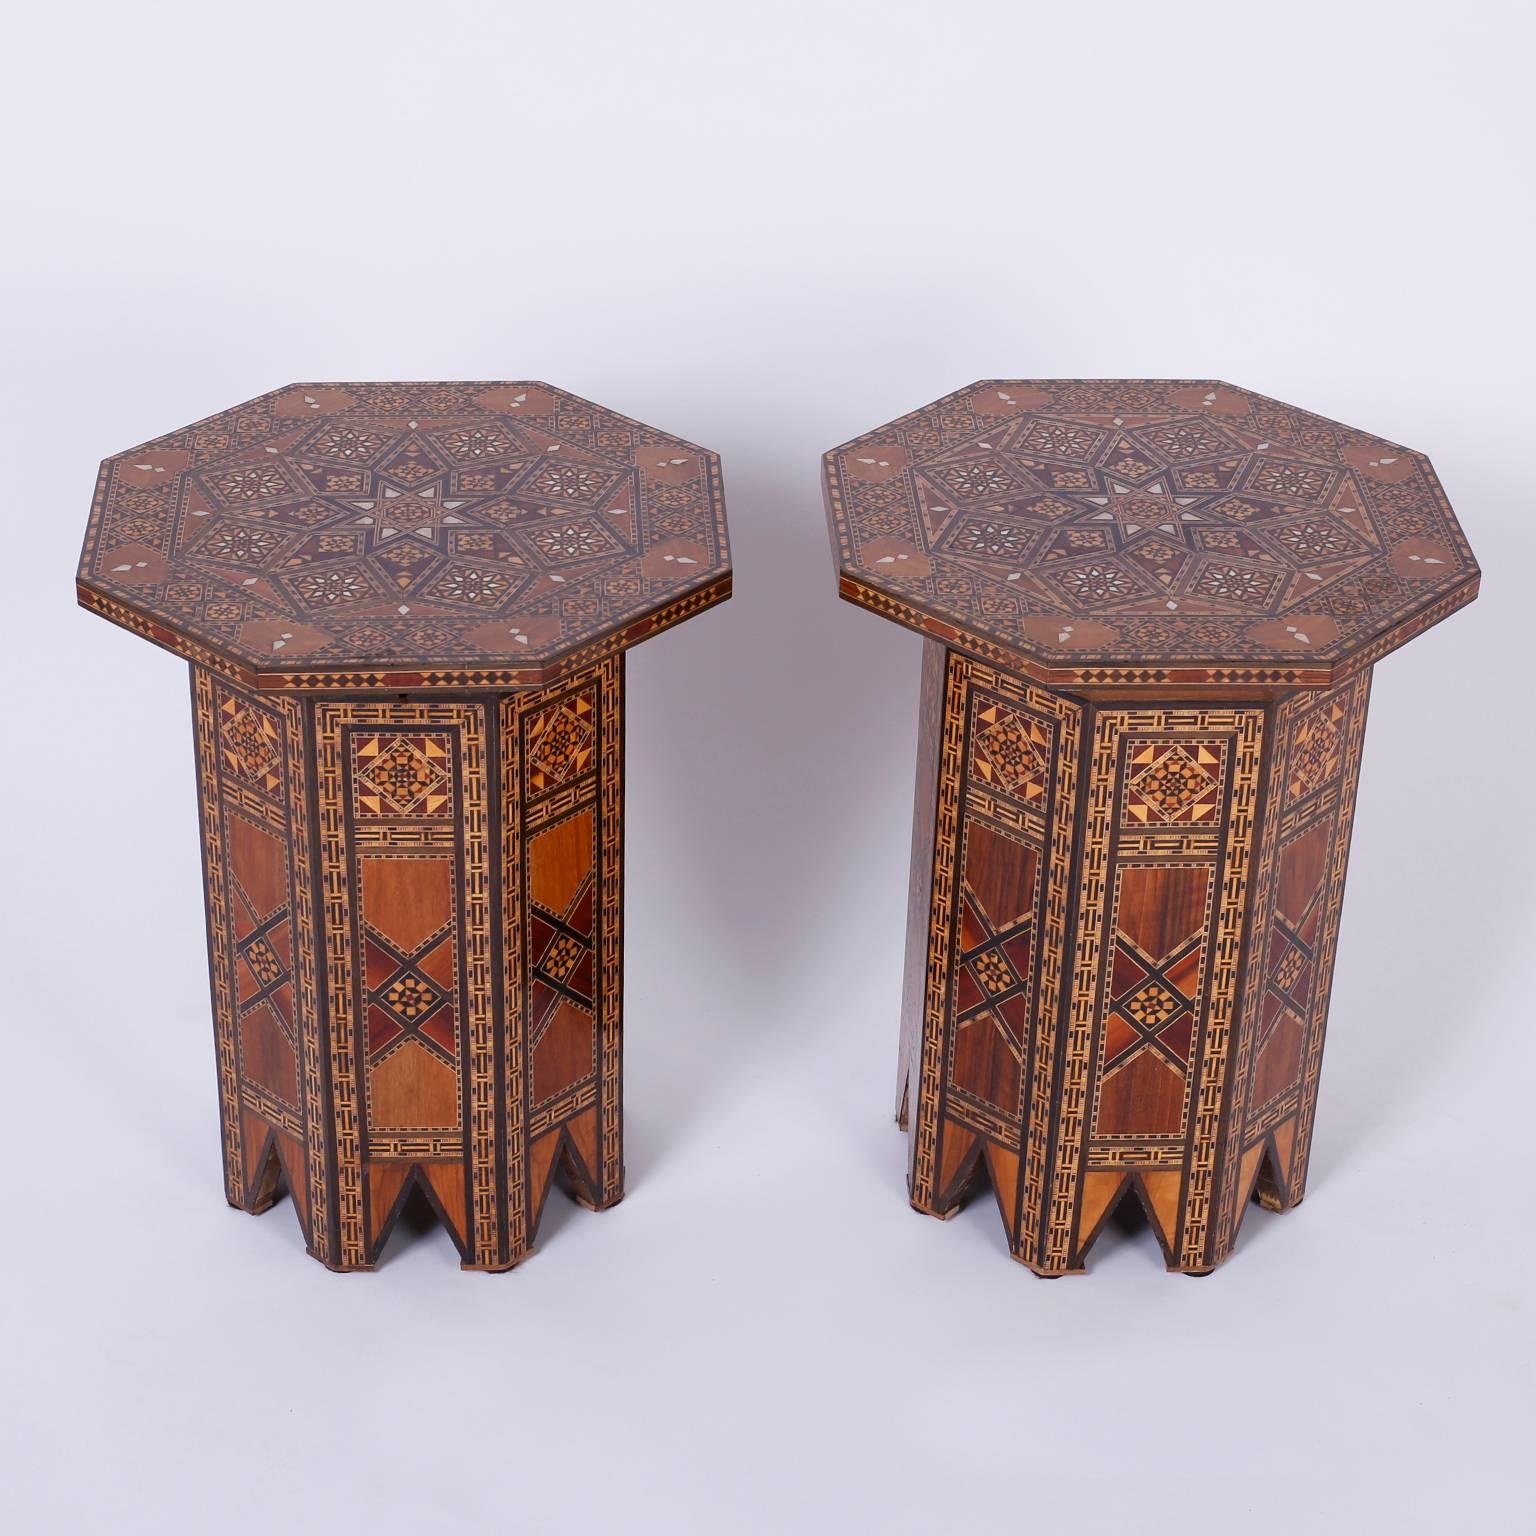 Dynamic pair of Syrian tables expertly crafted with exotic hard woods and displaying remarkable marquetry and inlays including mother-of-pearl, mahogany, and ebony. The tops are hinged lids to storage compartments. The bases are octagonal and